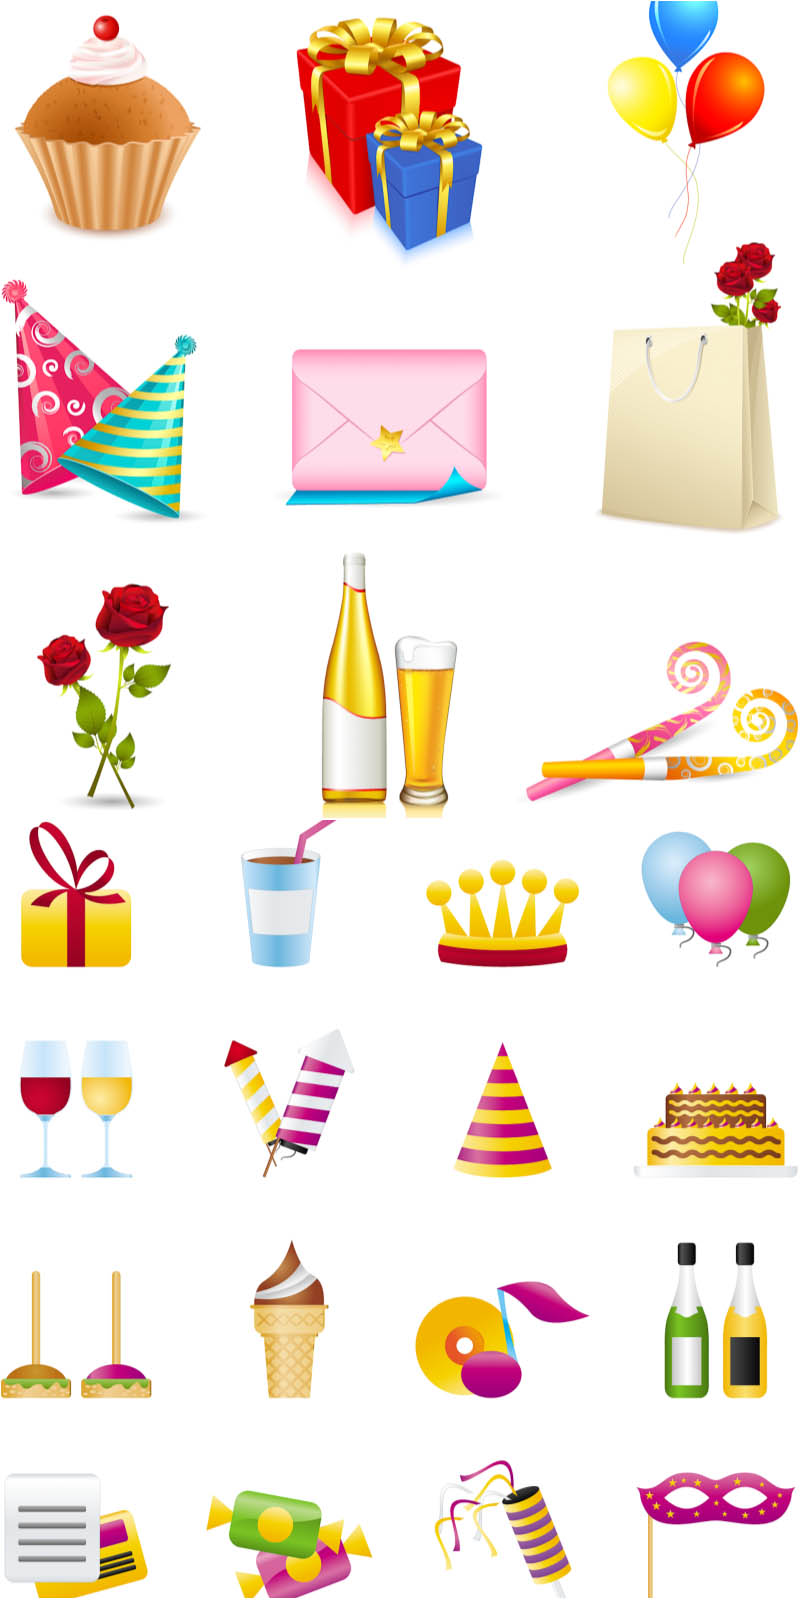 Name: “Free birthday icons vector”. License: for personal use only. Files: .Ai or .EPS vector illustration and templates for Adobe Illustrator. Download is free. Ready for print. This image is a vector